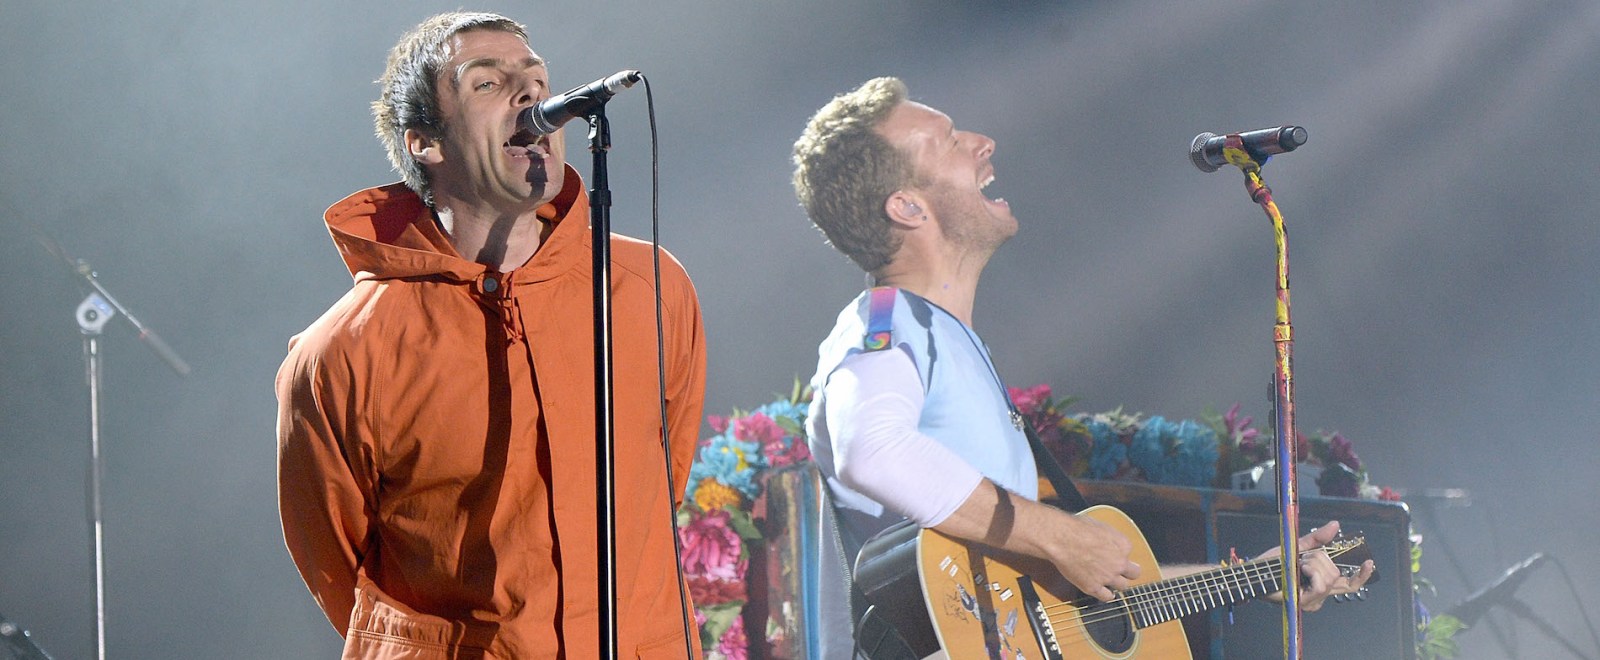 Liam Gallagher Oasis Chris Martin Coldplay 2017 One Love Manchester Benefit Concert